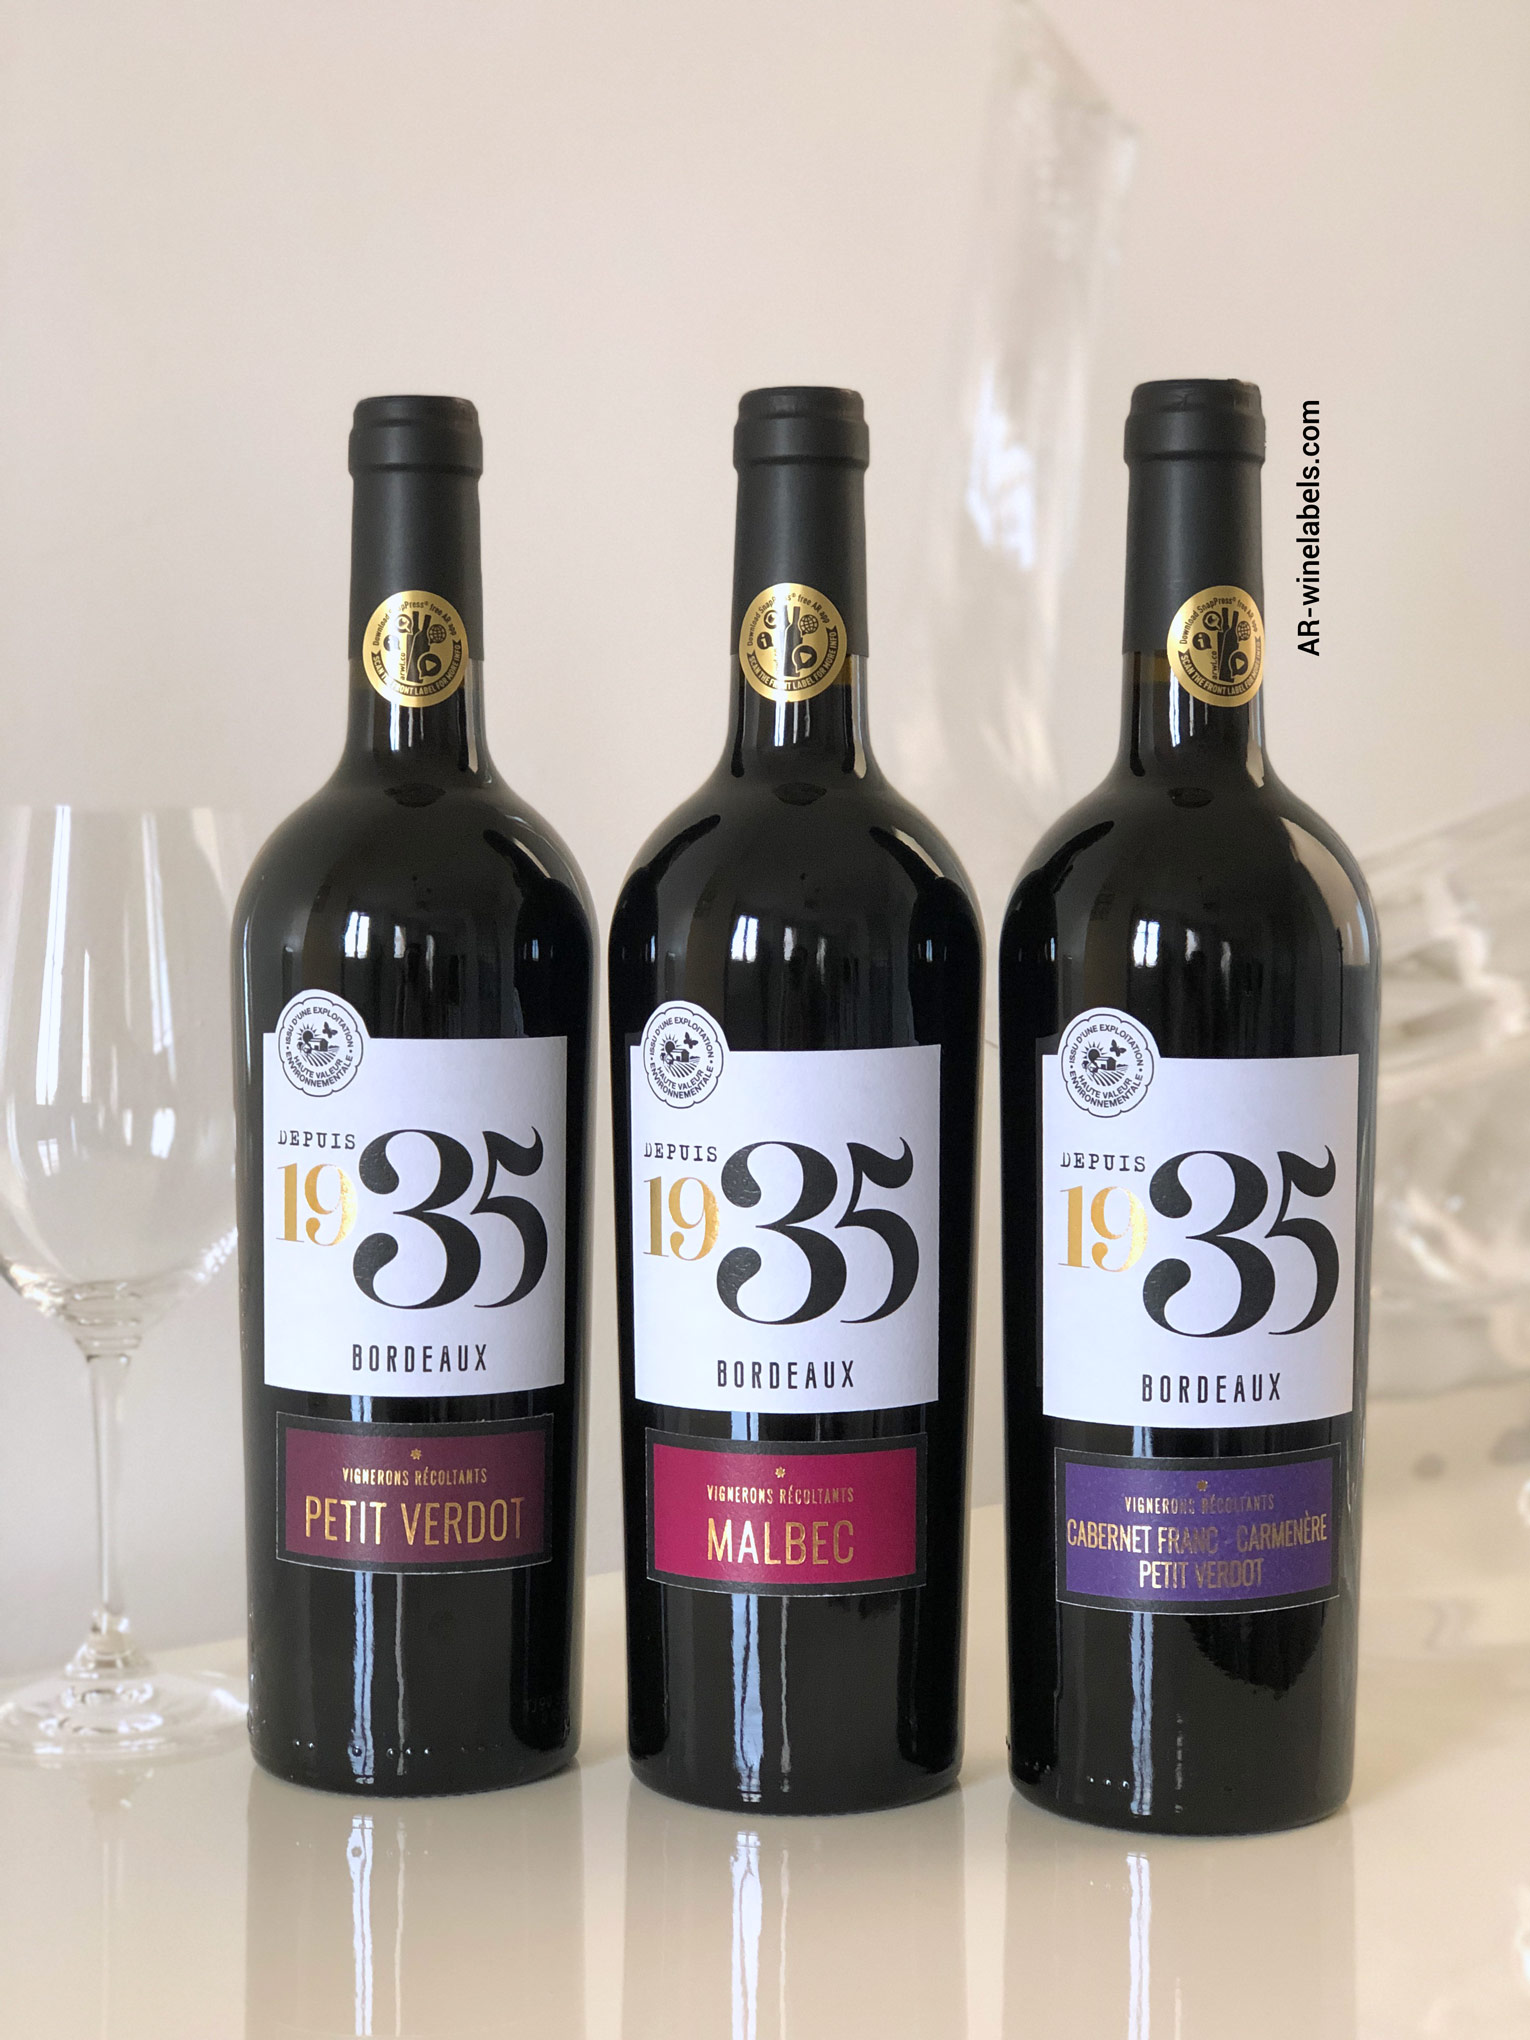 New range « Depuis 1935 », 3 red wines with connected wine labels from ARwinelabels.